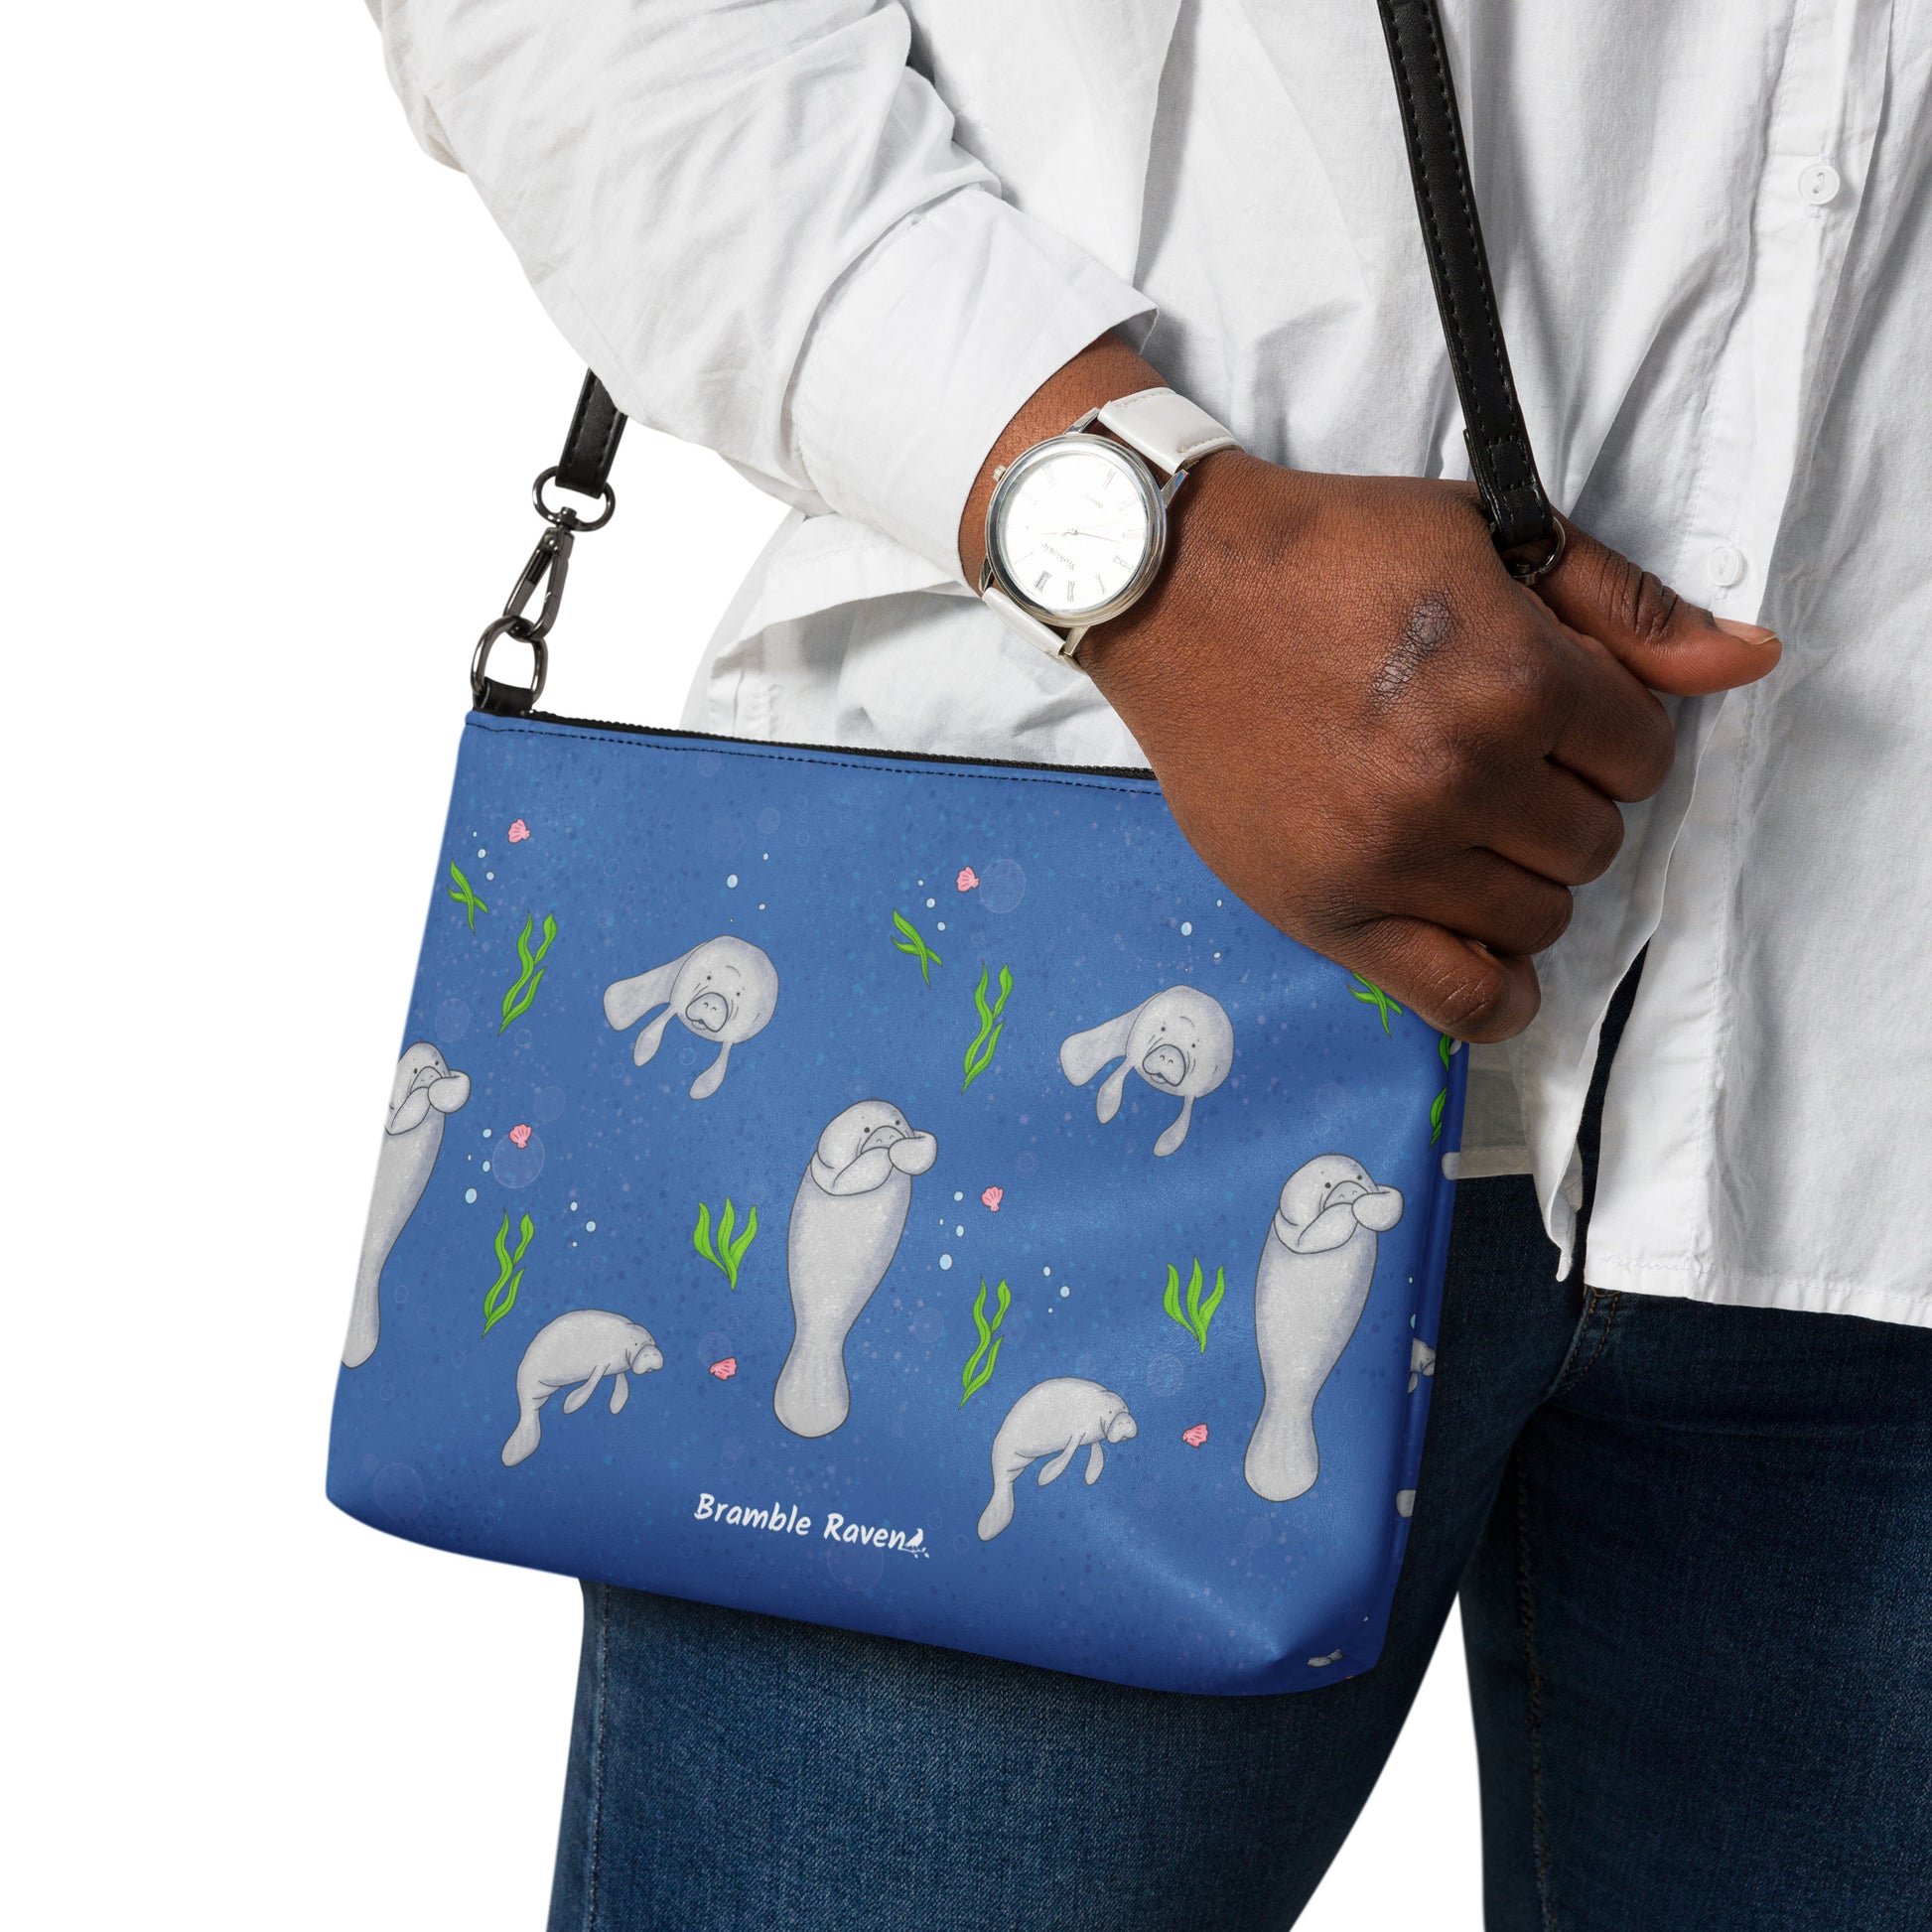 Manatee crossbody bag. Faux leather with polyester lining and dark grey hardware. Comes with adjustable removable wrist and shoulder straps. Front view of bag with manatees on a dark blue background. Shown on shoulder of model.